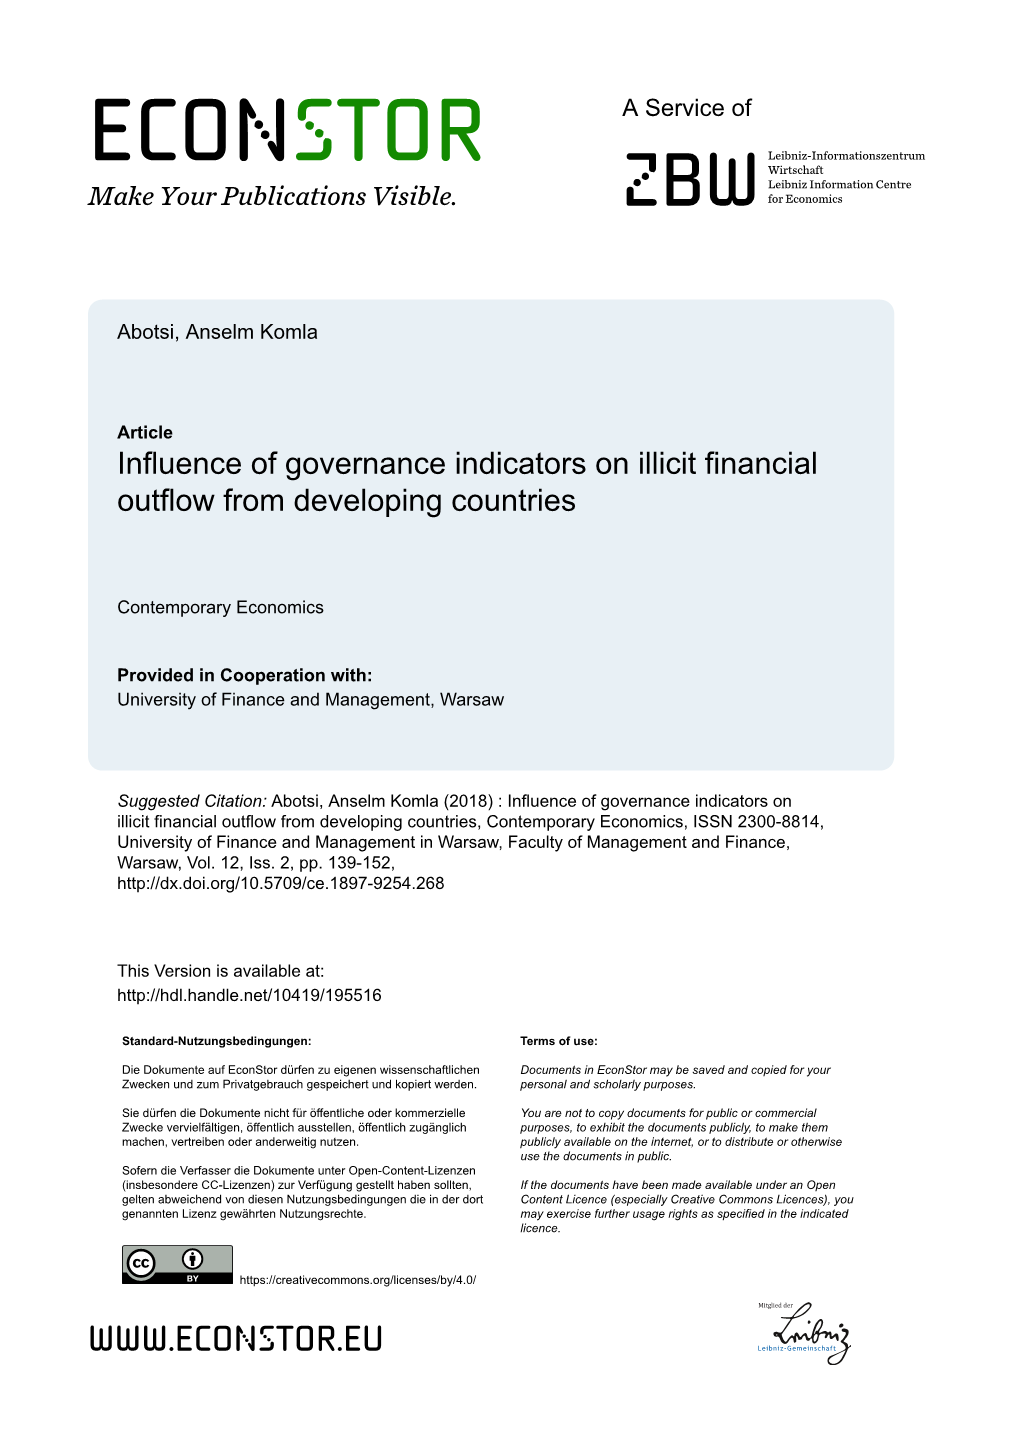 Influence of Governance Indicators on Illicit Financial Outflow from Developing Countries